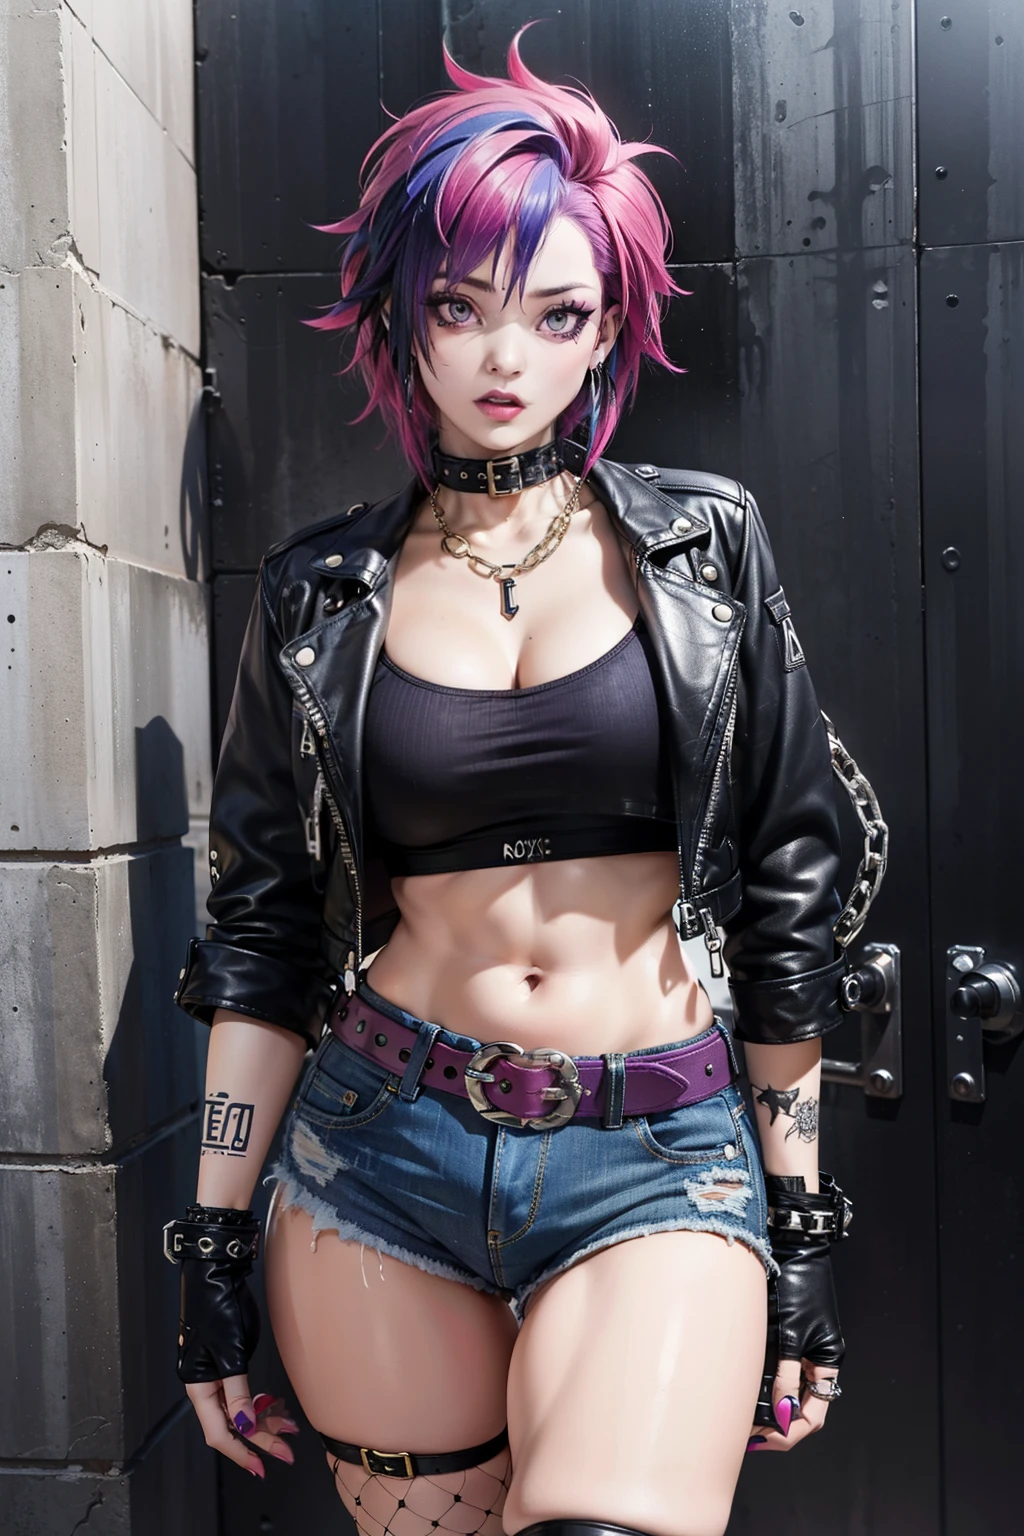 Create a role called Roxy, Punk rock girl who exudes rebellion. Roxy&#39;s unique look includes vibrant, (((An oversized purple and pink mohawk on top of her head))) Both sides of her scalp were shaved，To showcase a range of fascinating tattoos. Her style is the epitome of cool, A cropped leather jacket features plenty of edgy pins and needles, Complemented by a variety of exquisite punk jewelry. She also wears red or black fishnets with random holes.

Under her fiery red jacket, Roxy rock zigzag vest, Carefully designed clever holes，Revealing the carefully designed black bra underneath. (((Her rebellious look continued with a pair of dark denim shorts，Comes with chain as belt, and other iconic punk and goth rock accessorieake her look more perfect))).

Roxy&#39;s boots tell their own story, Experienced countless punk adventures, They now boast a shabby, Dark purple tones for a dirty look, Paired with bold red laces and chunky, Trampled soles. Imagine her in the gritty atmosphere of a dive bar, Surrounded by punk rockers, The visuals are reminiscent of Zack Snyder&#39;s unique style